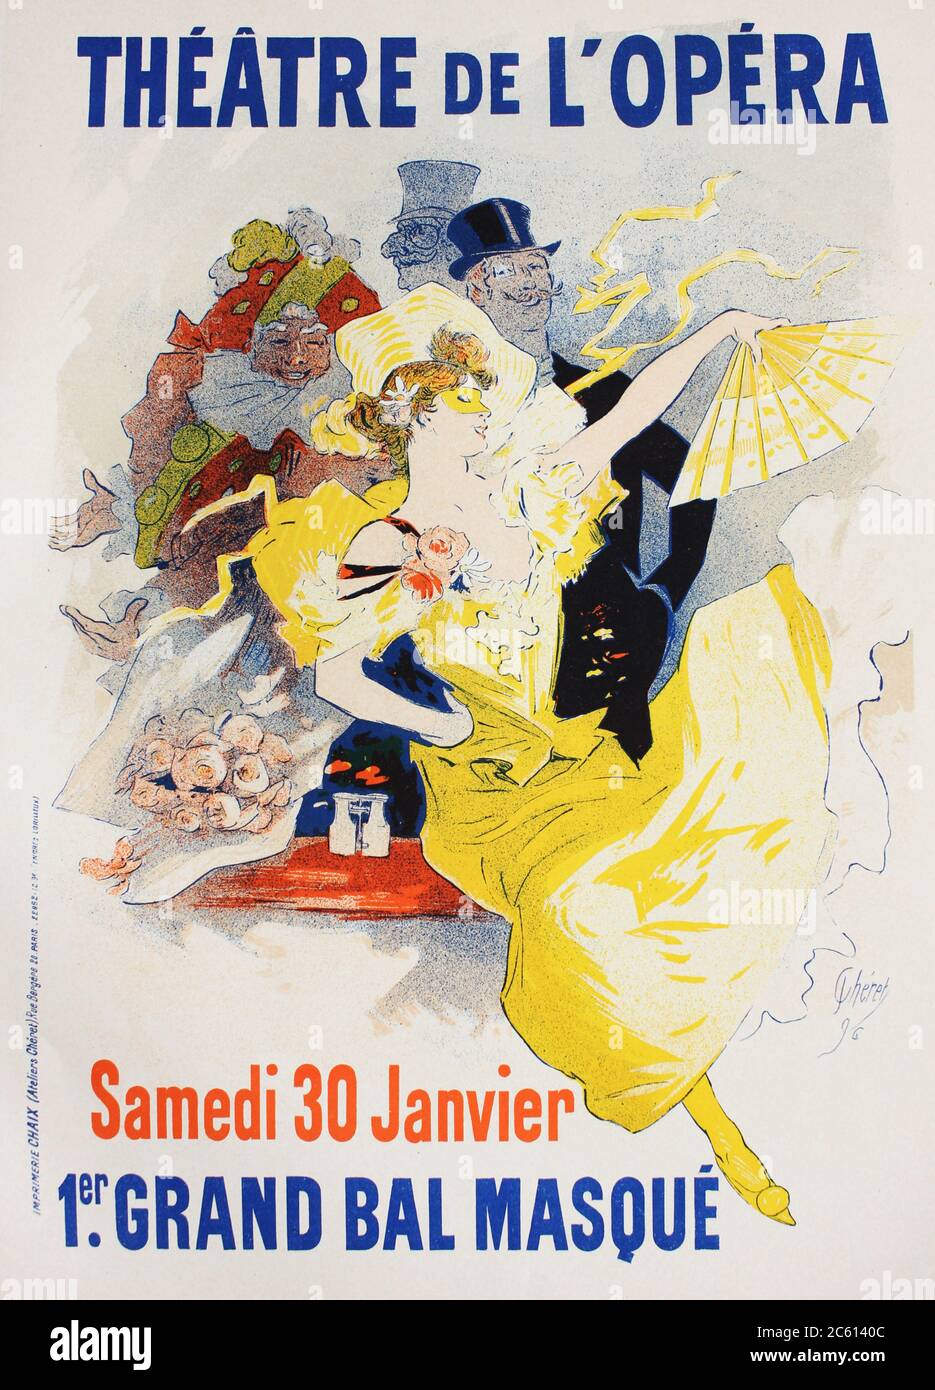 The poster of advertisment of the opera performance in the vintage book Les Maitres de L'Affiche, by Roger Marx, 1897. Stock Photo